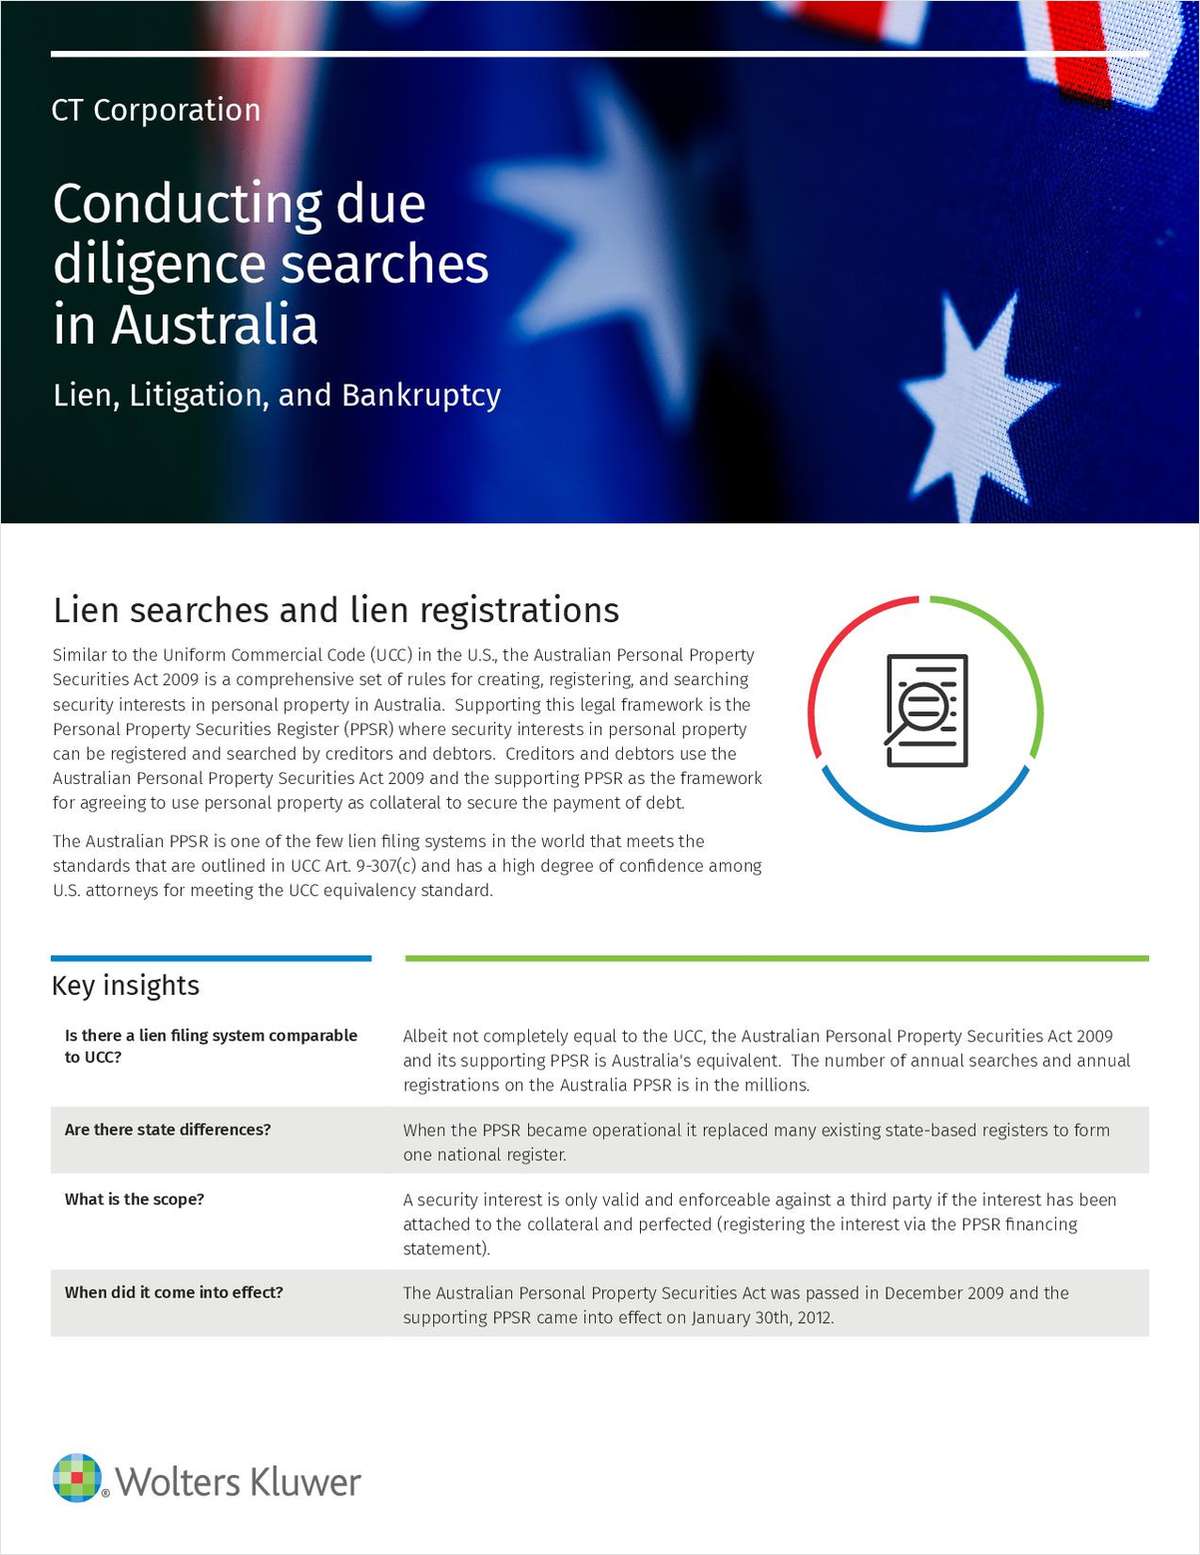 U.S. attorneys need to have a basic understanding of Australia’s legal system to effectively identify and understand risks as they assist clients with legal work. Download this guide to learn key insights into conducting due diligence searches in Australia.